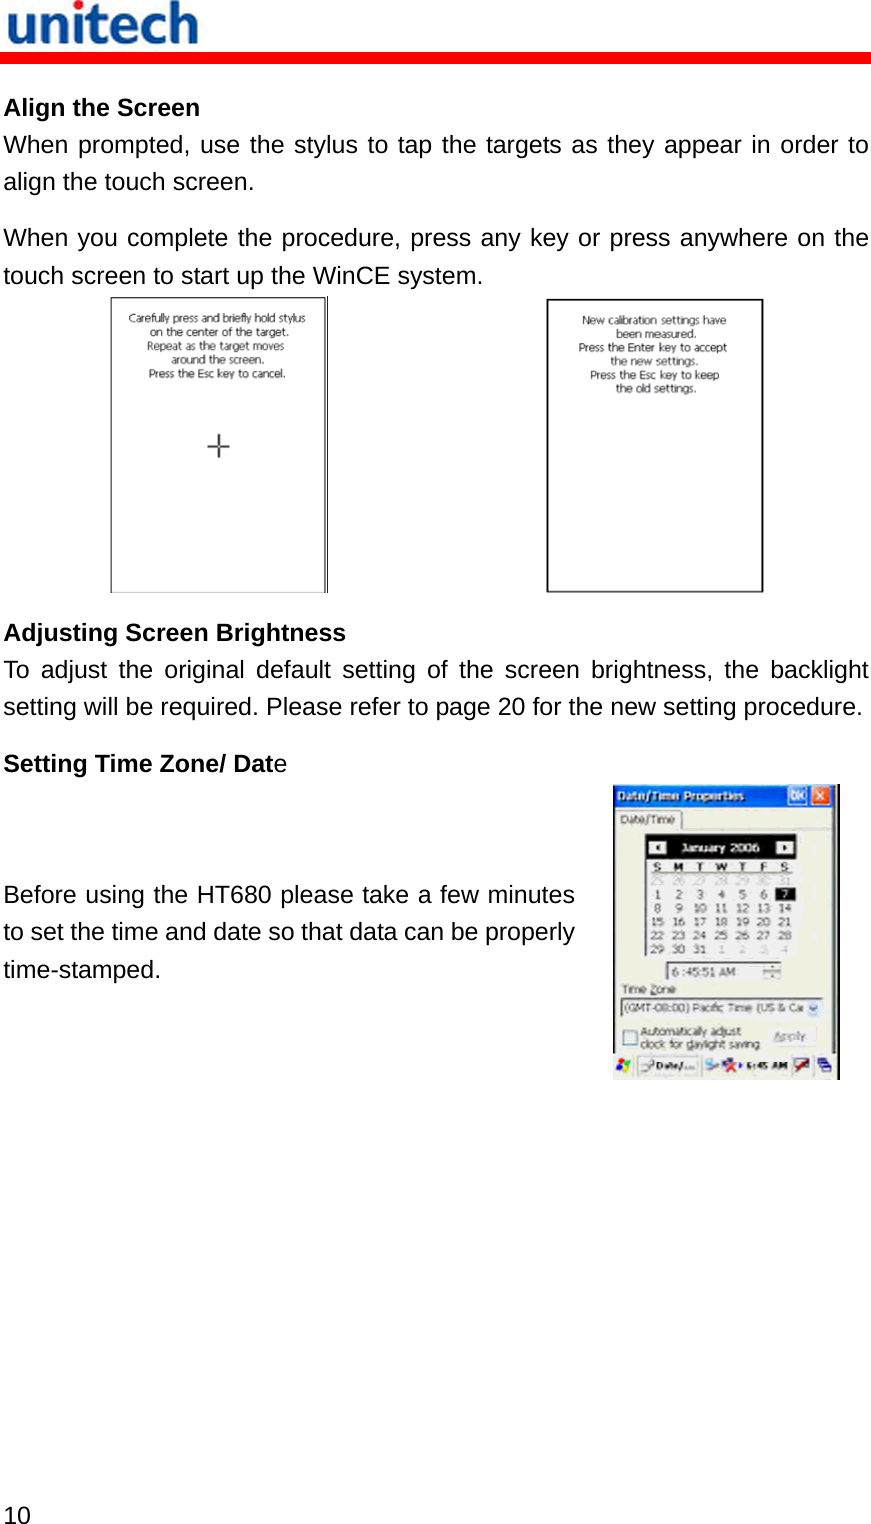   10  Align the Screen When prompted, use the stylus to tap the targets as they appear in order to align the touch screen. When you complete the procedure, press any key or press anywhere on the touch screen to start up the WinCE system.    Adjusting Screen Brightness To adjust the original default setting of the screen brightness, the backlight setting will be required. Please refer to page 20 for the new setting procedure. Setting Time Zone/ Date Before using the HT680 please take a few minutes to set the time and date so that data can be properly time-stamped.  